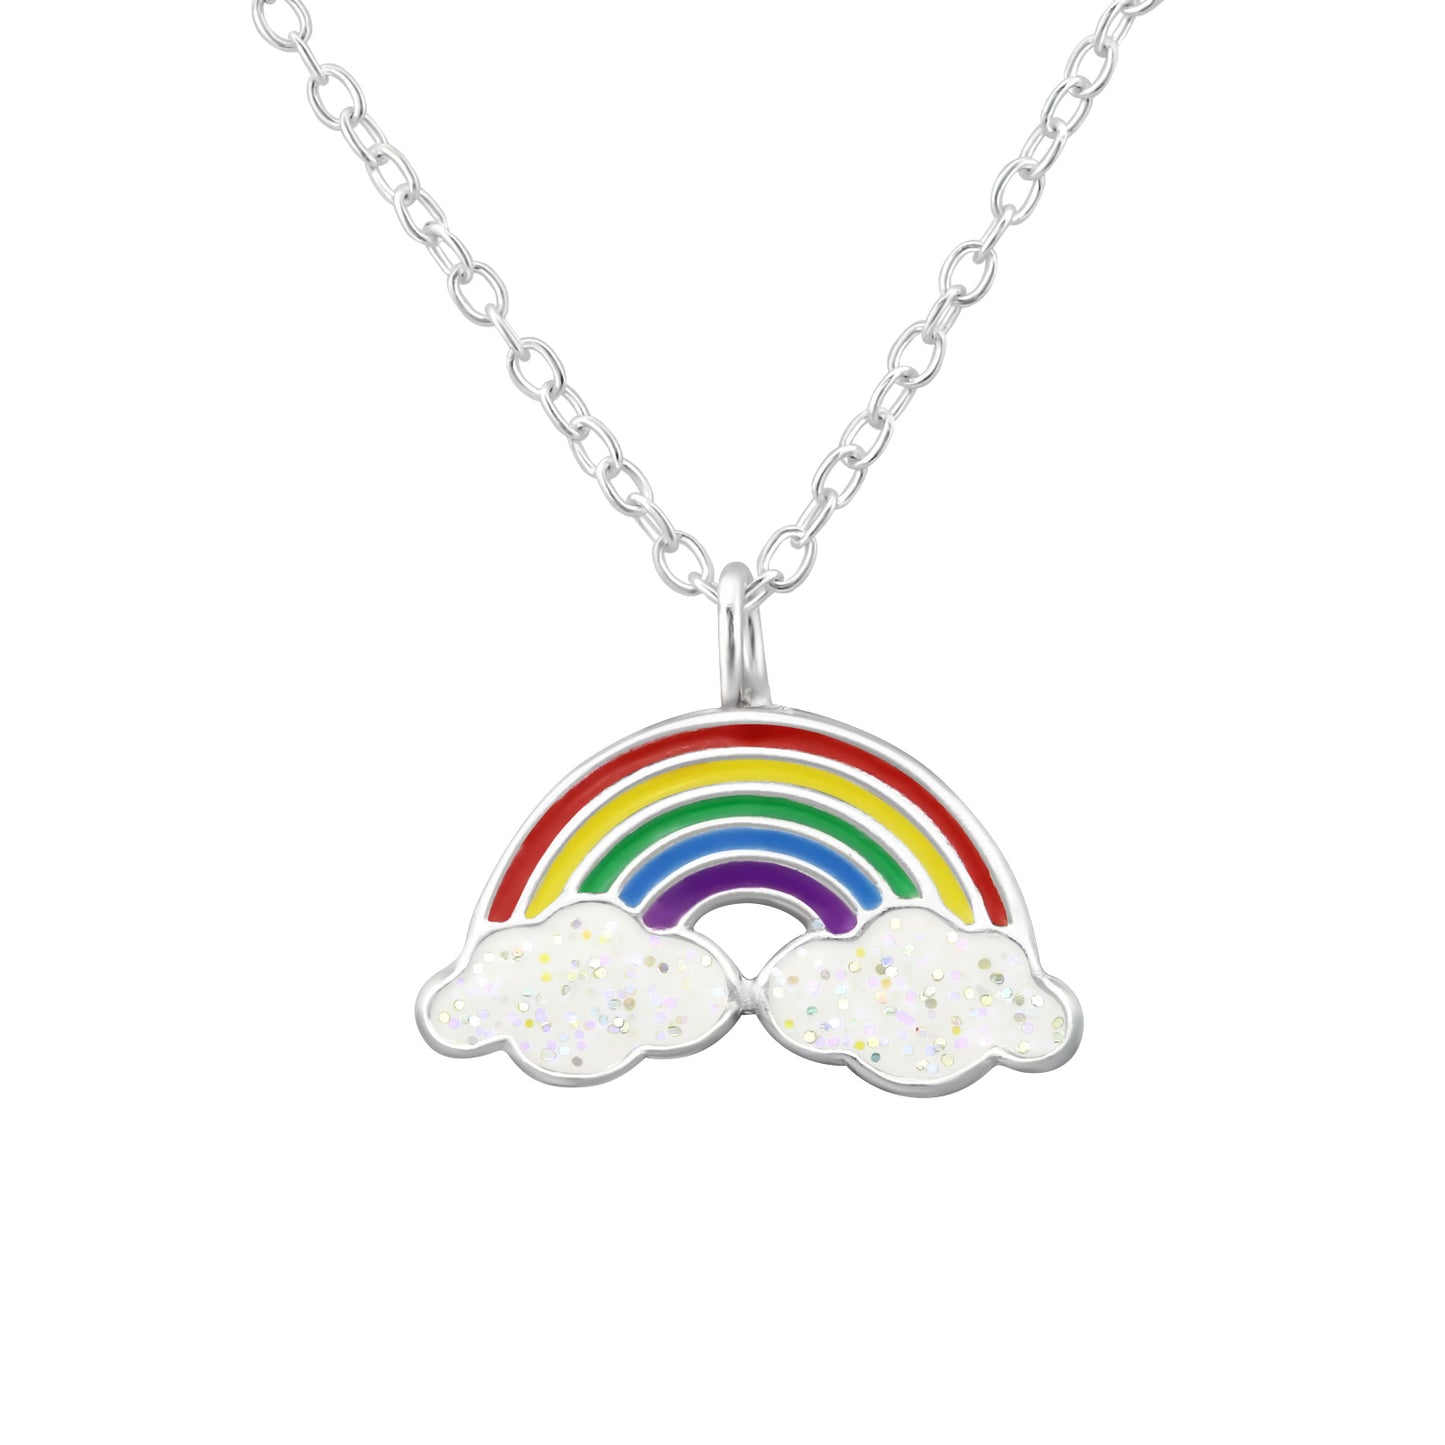 Somewhere over the rainbow can be a reality with these gorgeous vibrant pendant necklace.